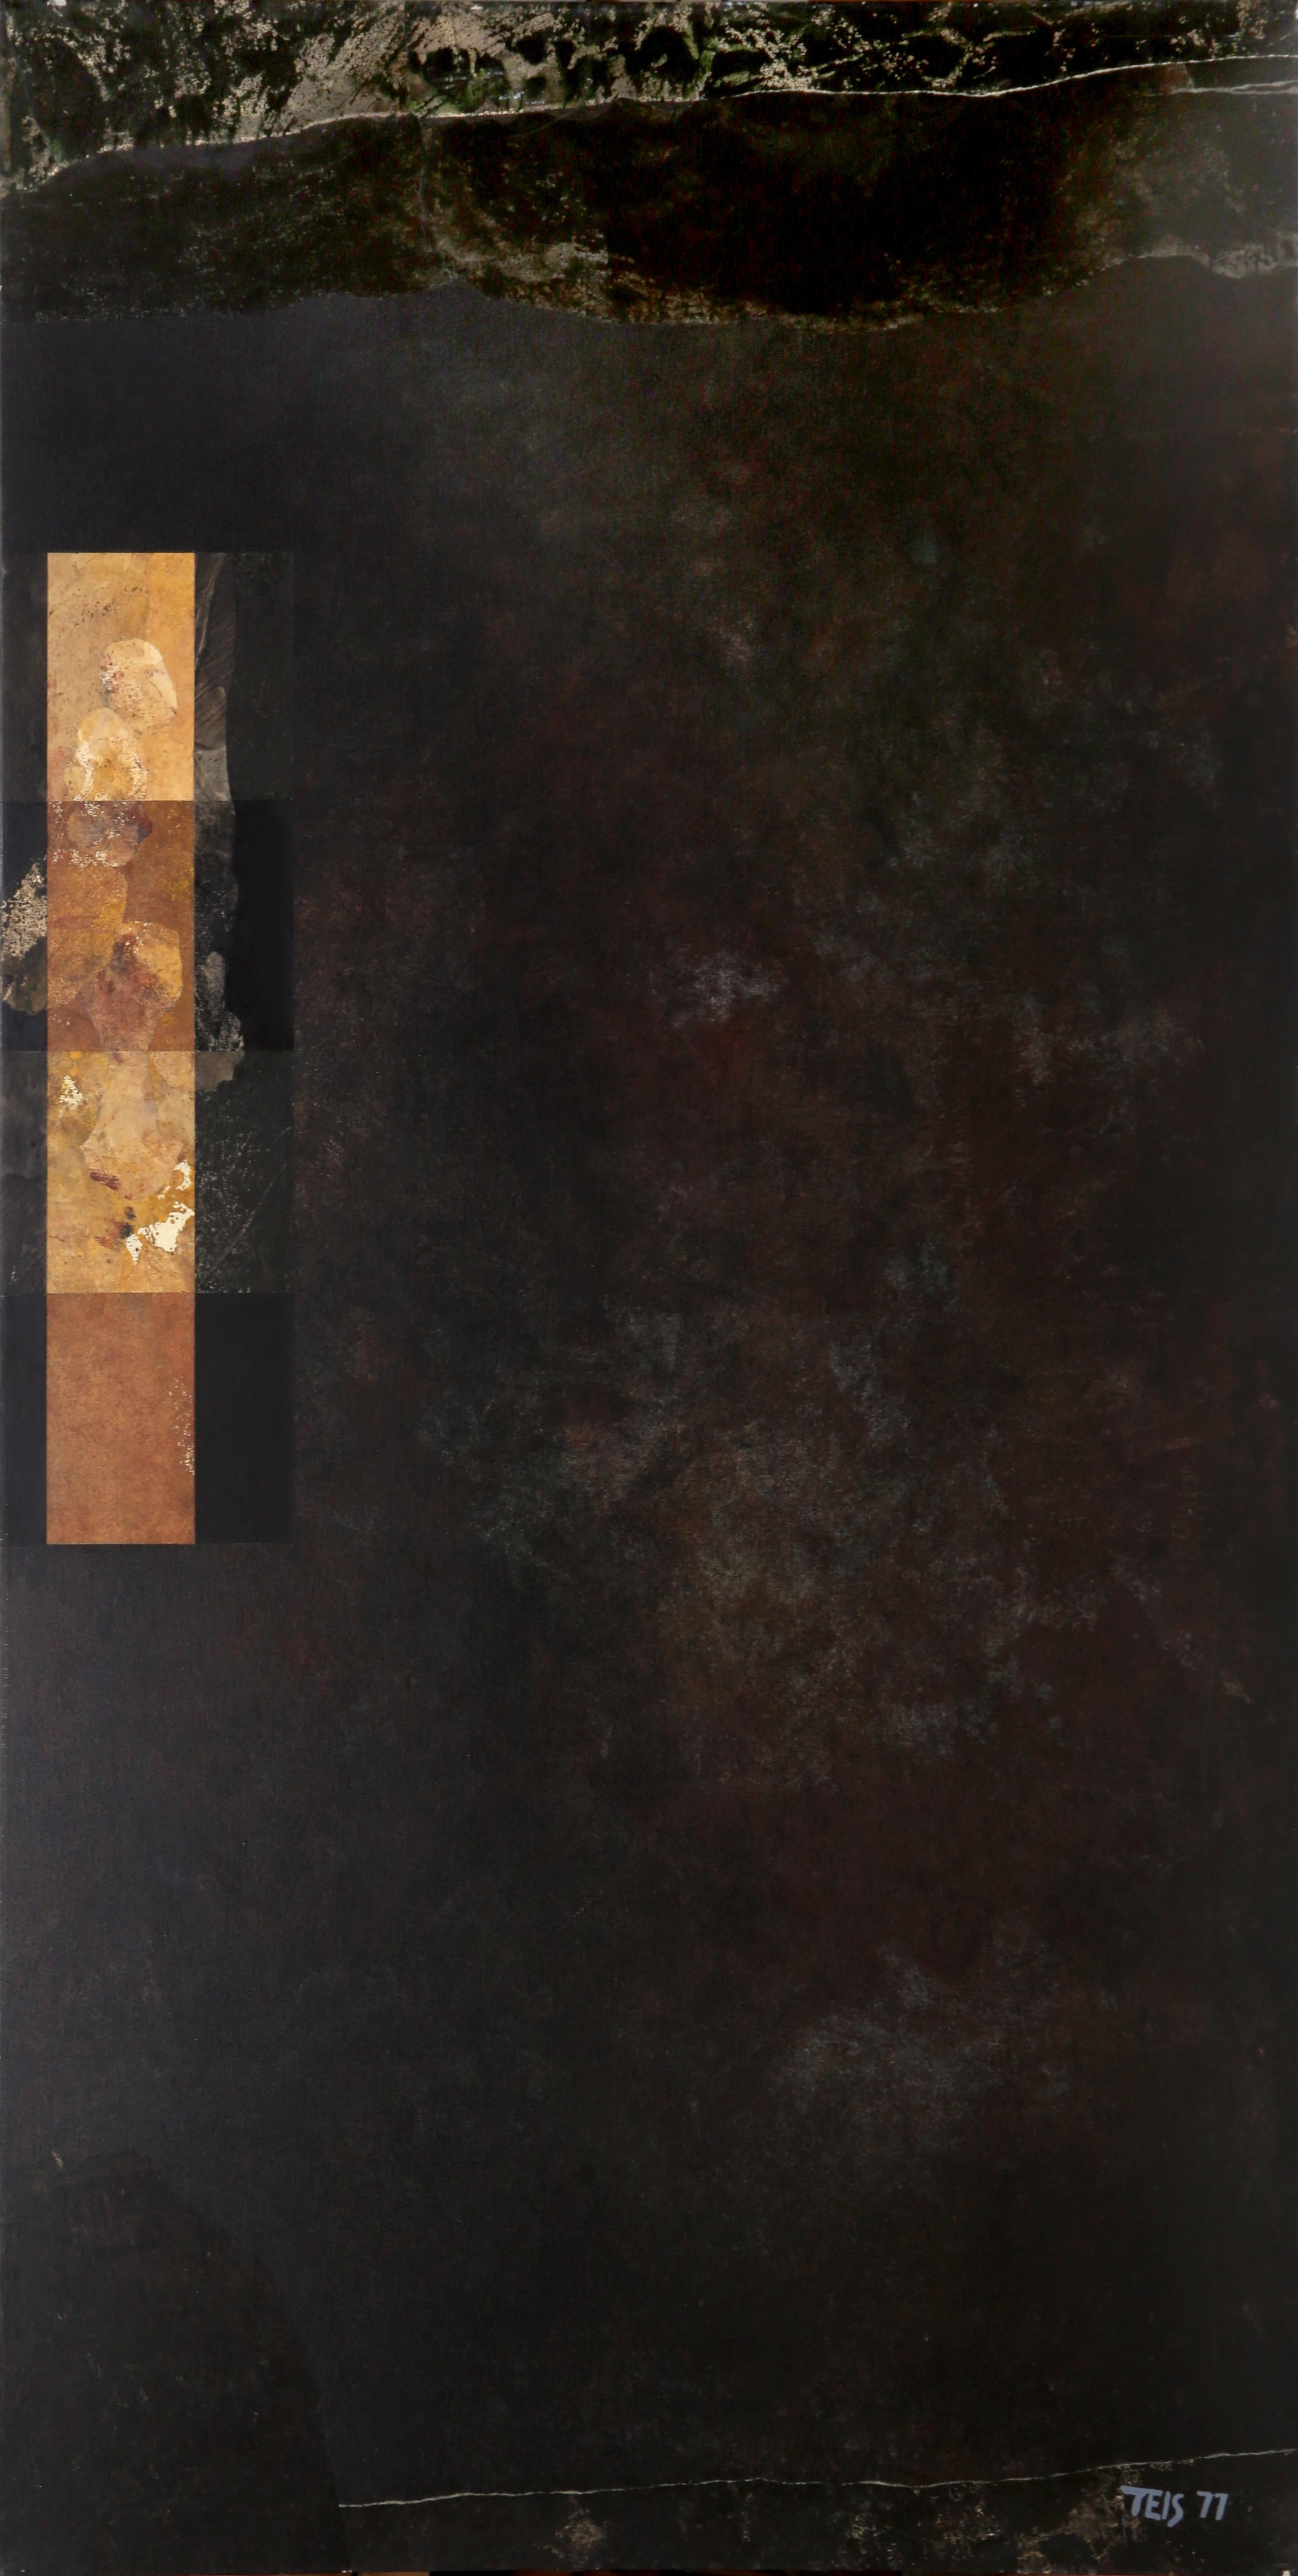 Artist: Dan Teis
Title: Gold Squares on Black
Date: 1977
Acrylic on Canvas, Signed l.r.
Size: 72 x 40 in. (182.88 x 101.6 cm)